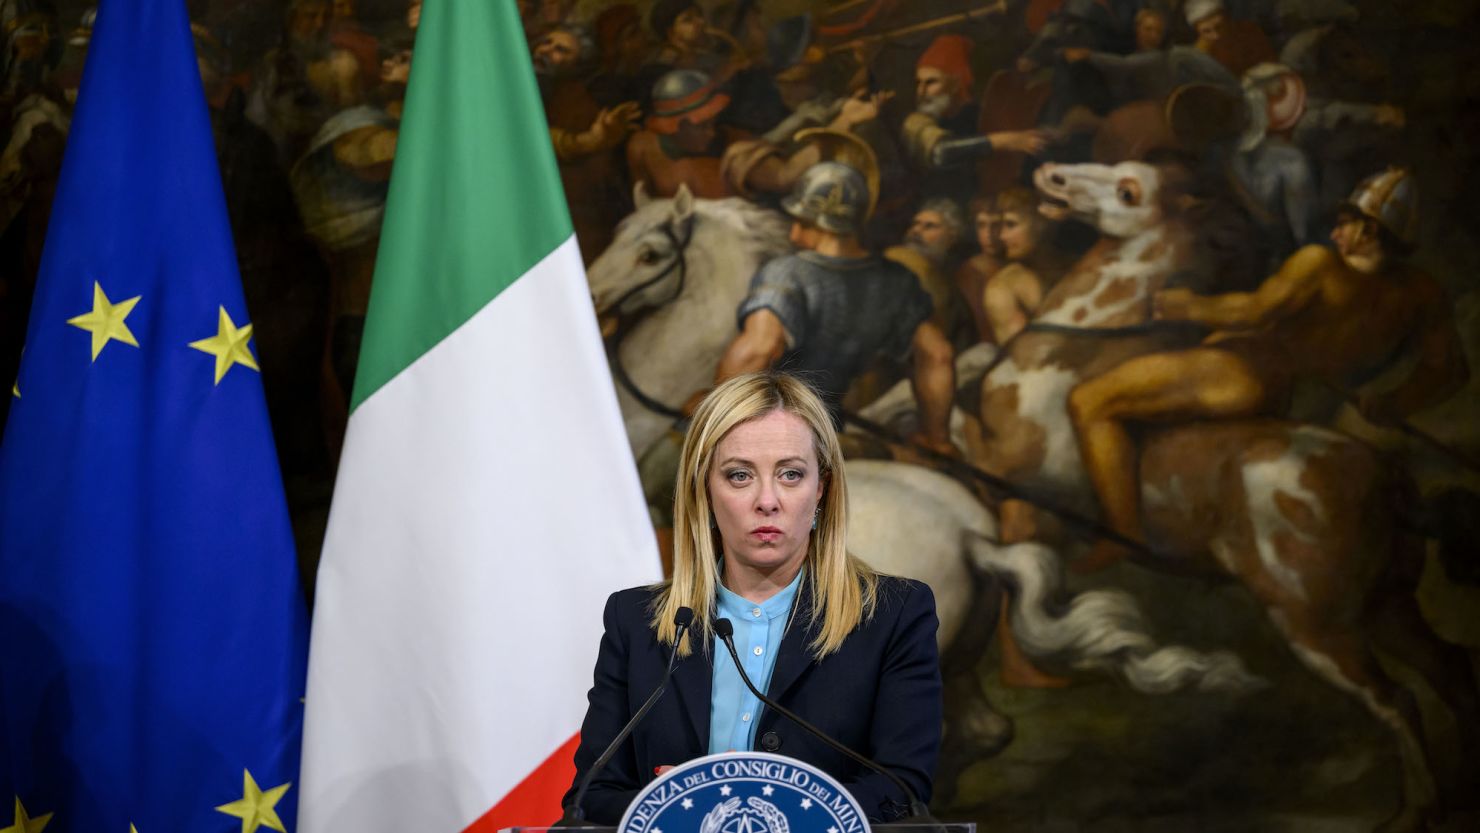 ROME, ITALY - APRIL 05: Italian Prime Minister Giorgia Meloni and Spain's Prime Minister Pedro Sanchez (not in picture) hold a joint press conference after their meeting at Palazzo Chigi, on April 5, 2023 in Rome, Italy. (Photo by Antonio Masiello/Getty Images)